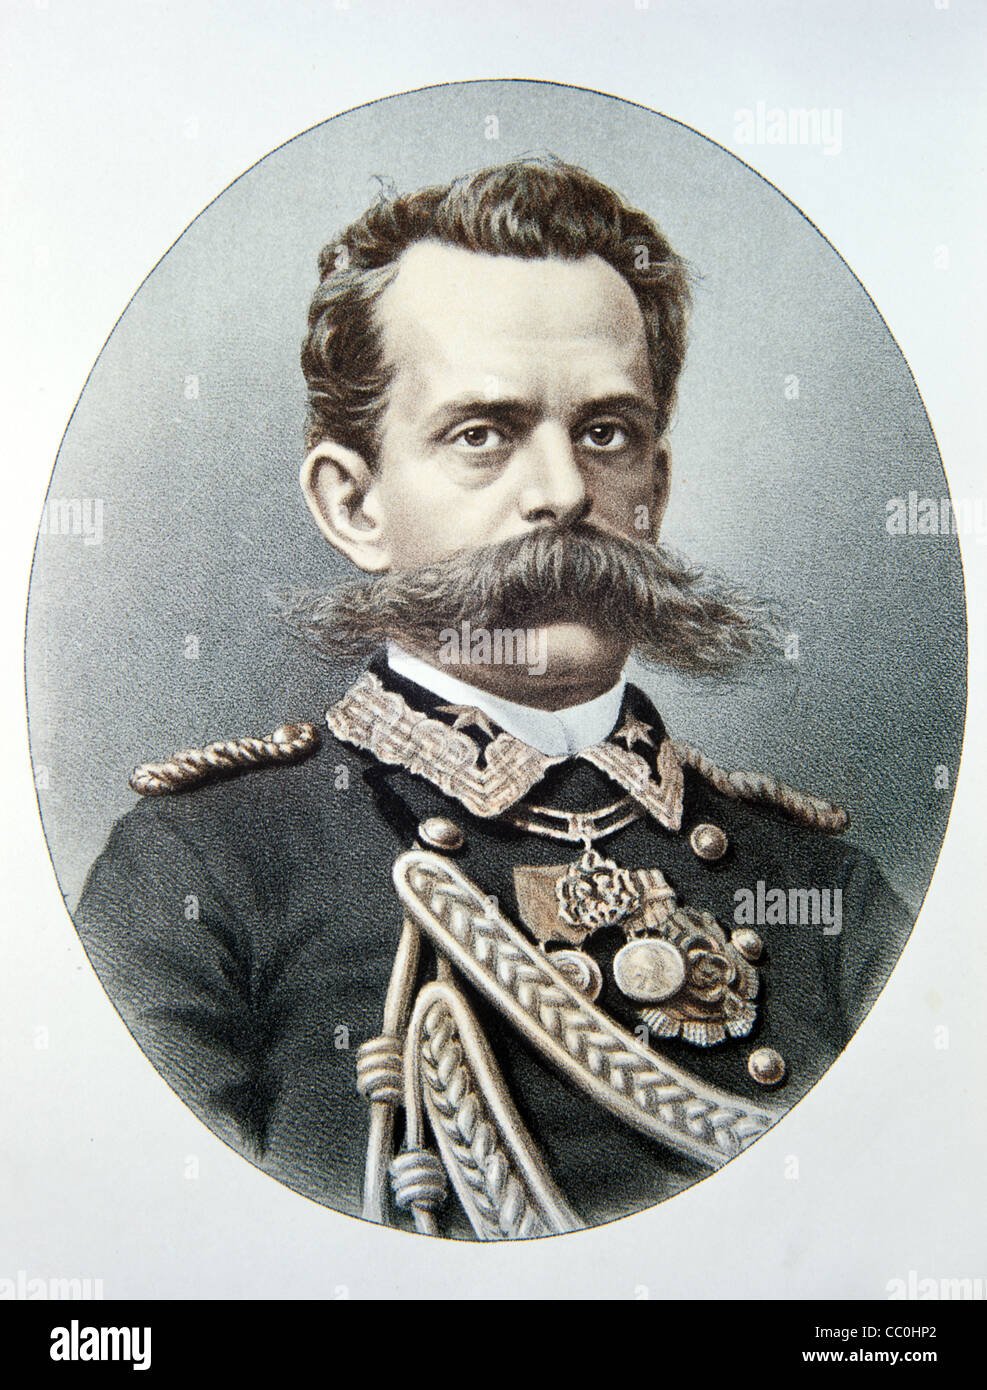 Portrait of Umberto I of Italy, or Humbert I, the Good. (1844-1900). King of Italy, Reigned 1878-1900. Portrait Shoing Huge Handlebar Moustache. Colour Lithograph c1880. Vintage Illustration or Engraving Stock Photo